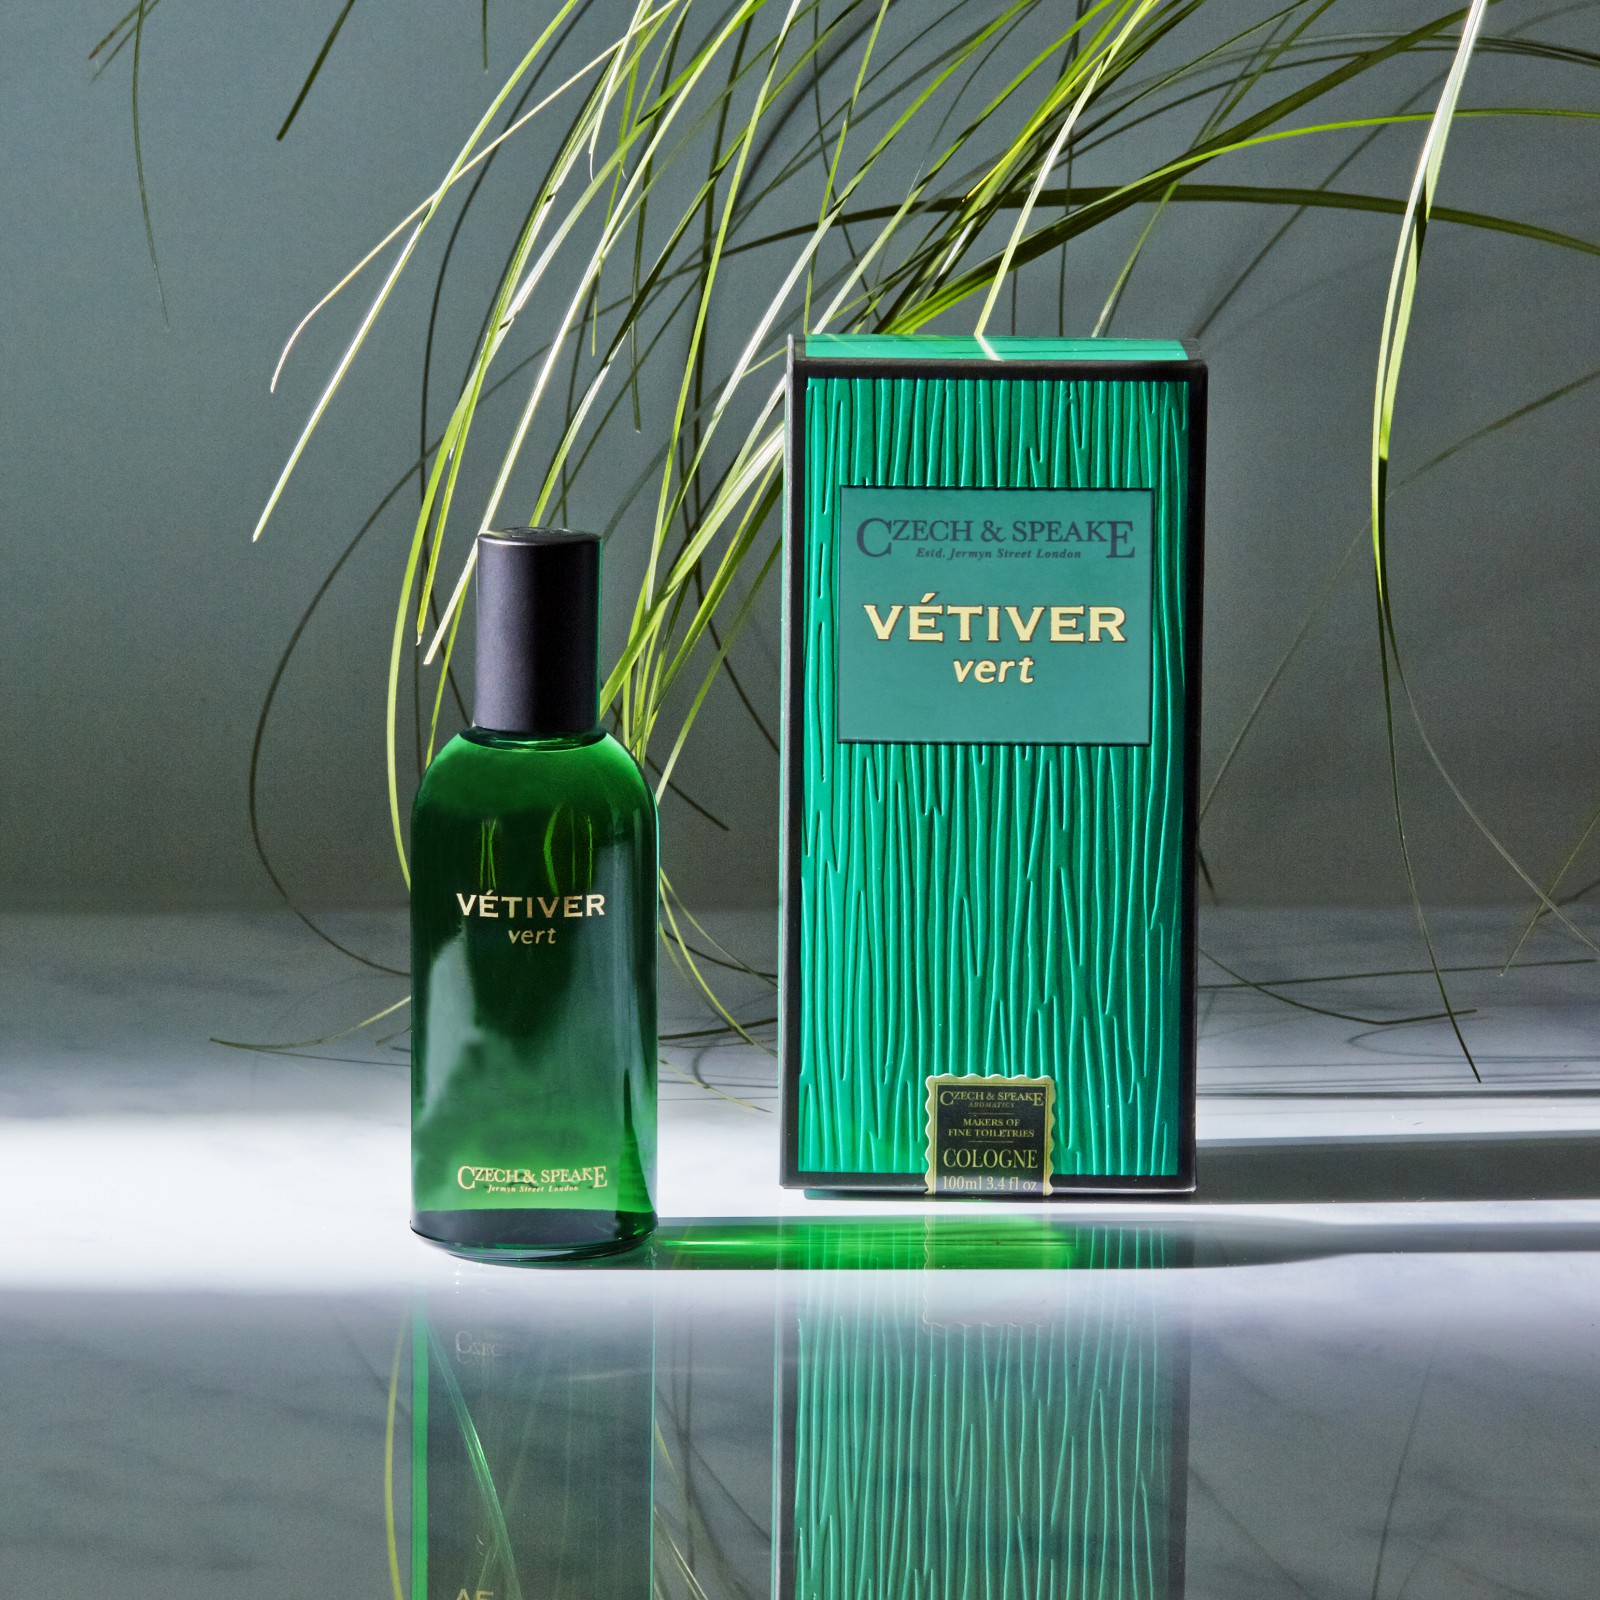 Green bottle of aftershave with green box